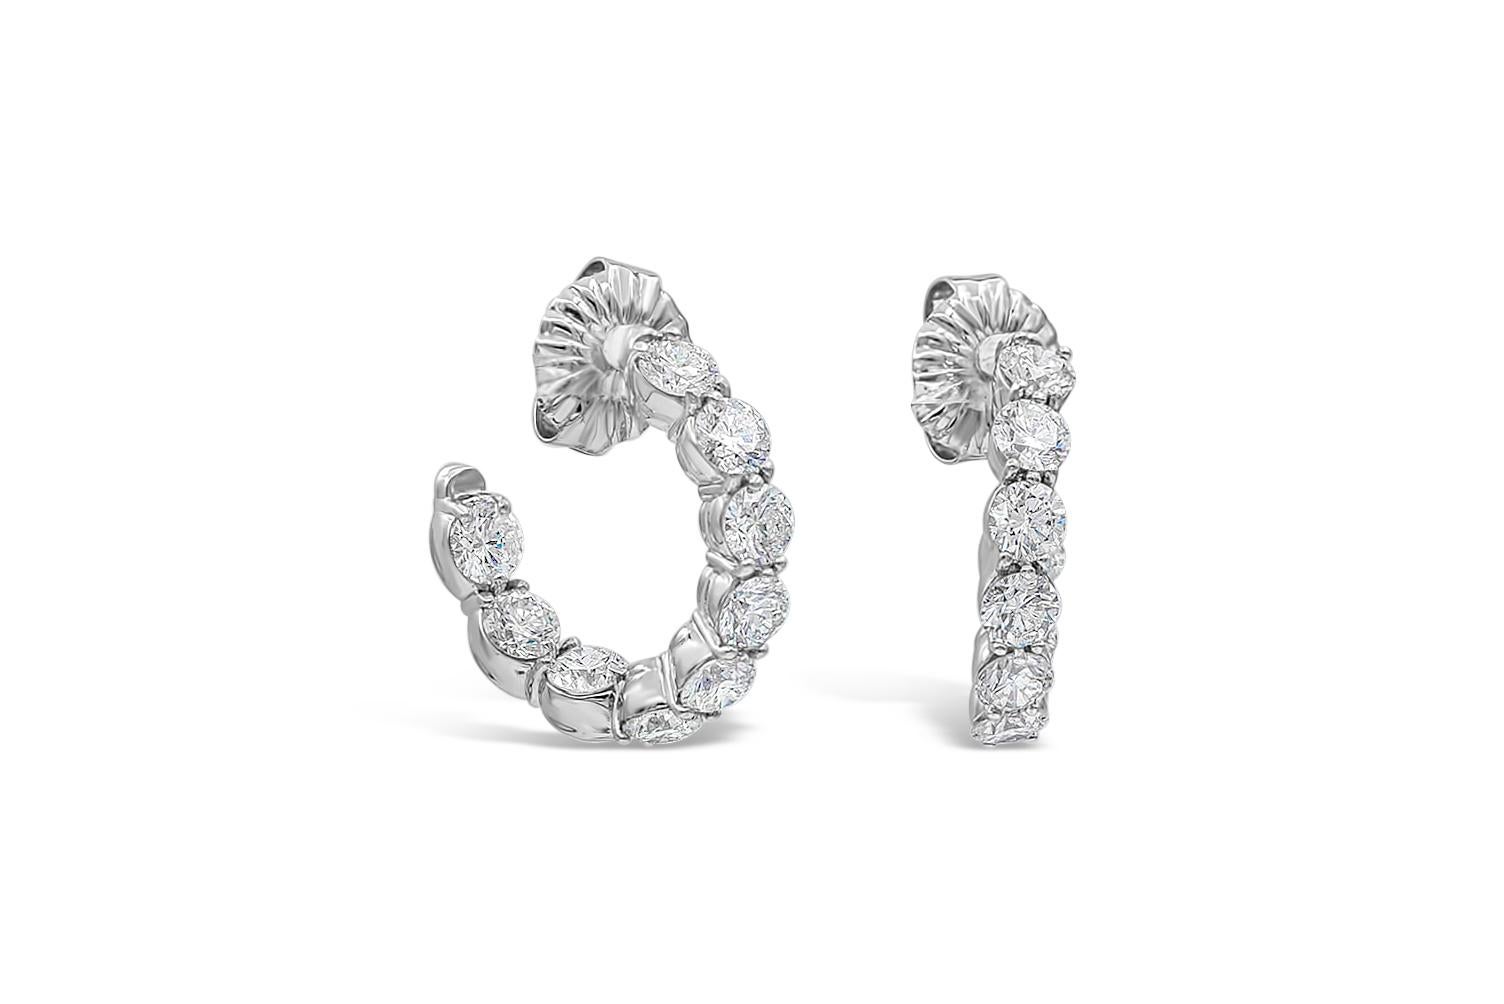 A unique hoop earrings style showcasing a row of round brilliant diamonds weighing 4.79 carats total, F Color and SI2 in Clarity. Diamonds are set in a curved inside-out with shared prong setting. Finely made in 18K White Gold.

Style available in